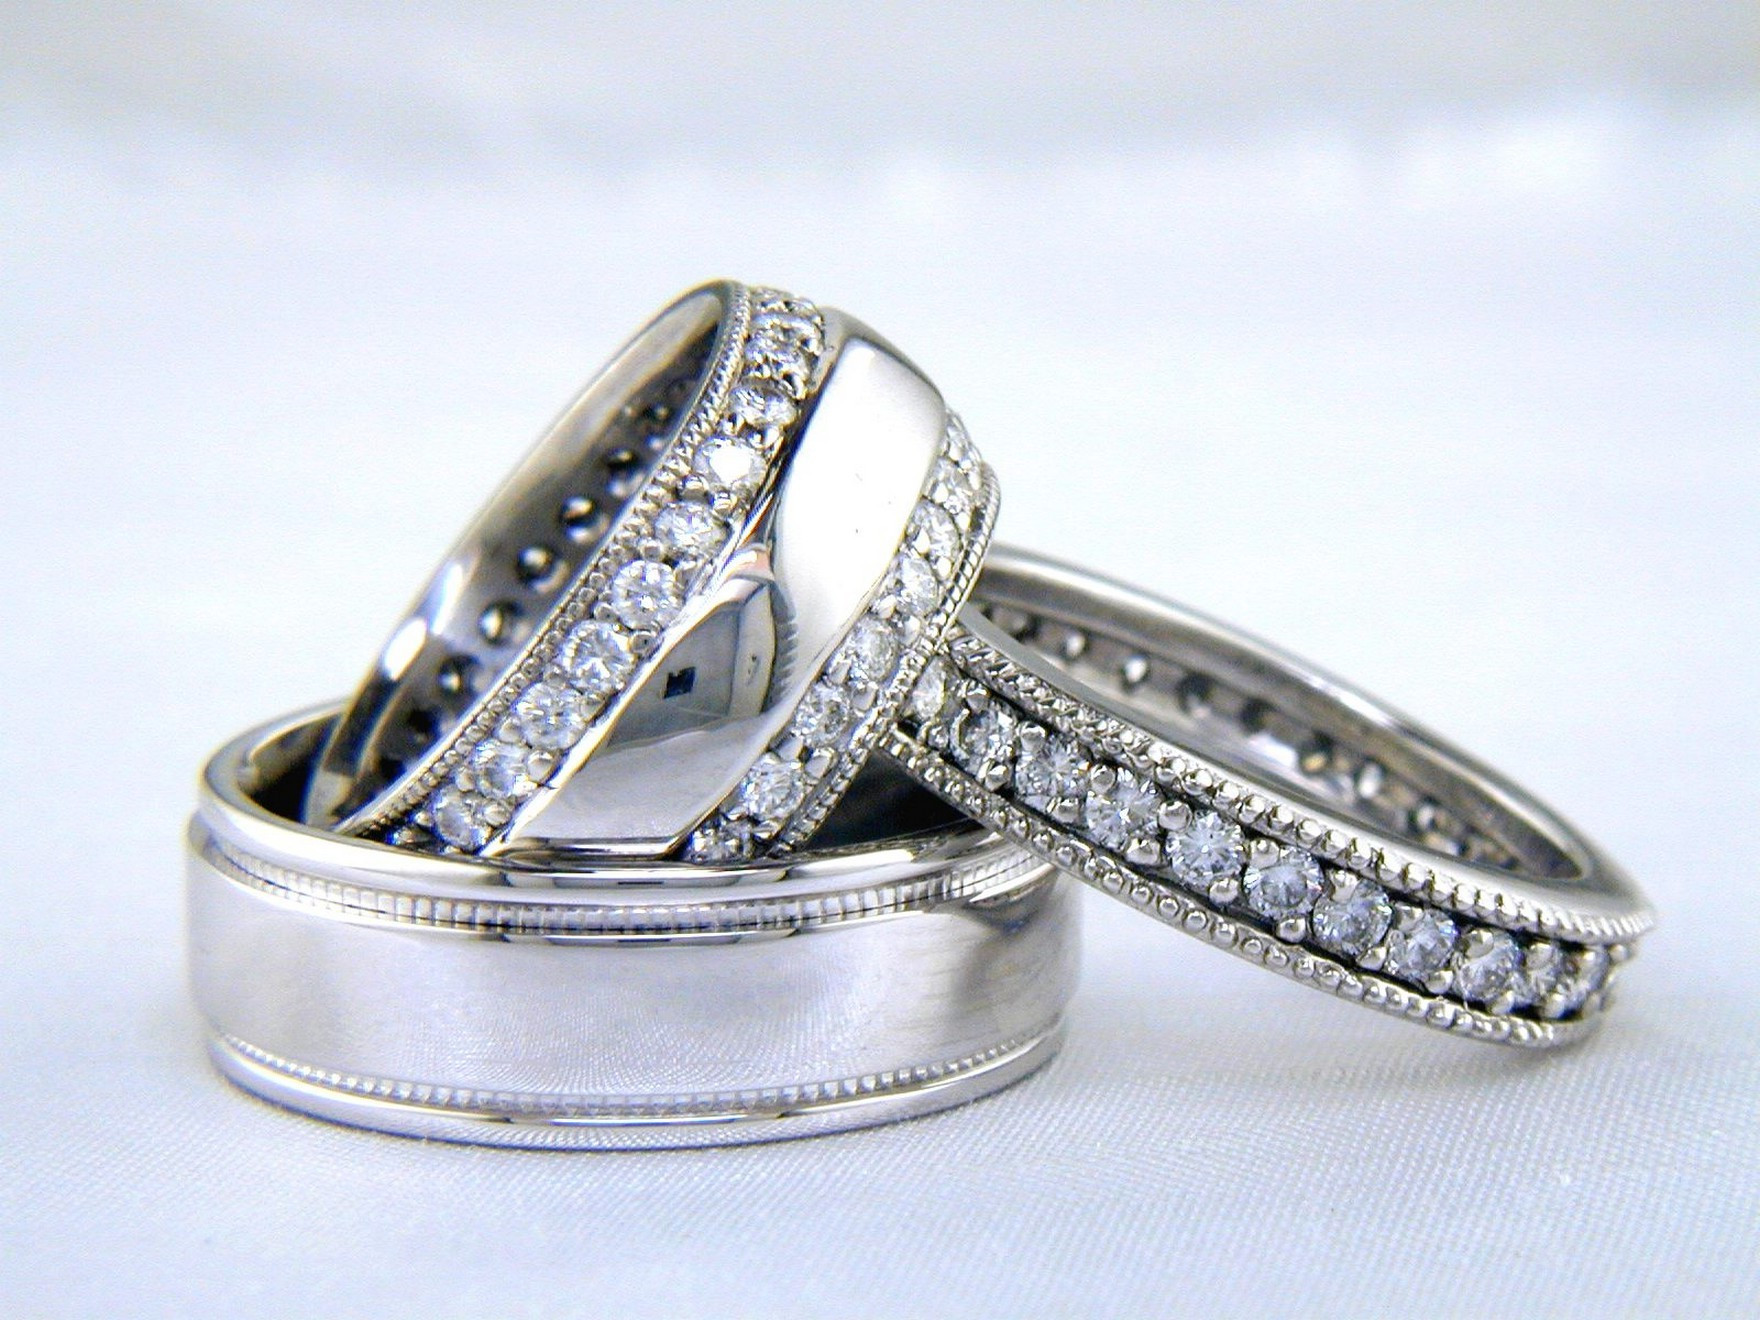 Cheap Wedding Ring Sets For Women
 Why Should Make Wedding Ring Sets For Women and Also Men